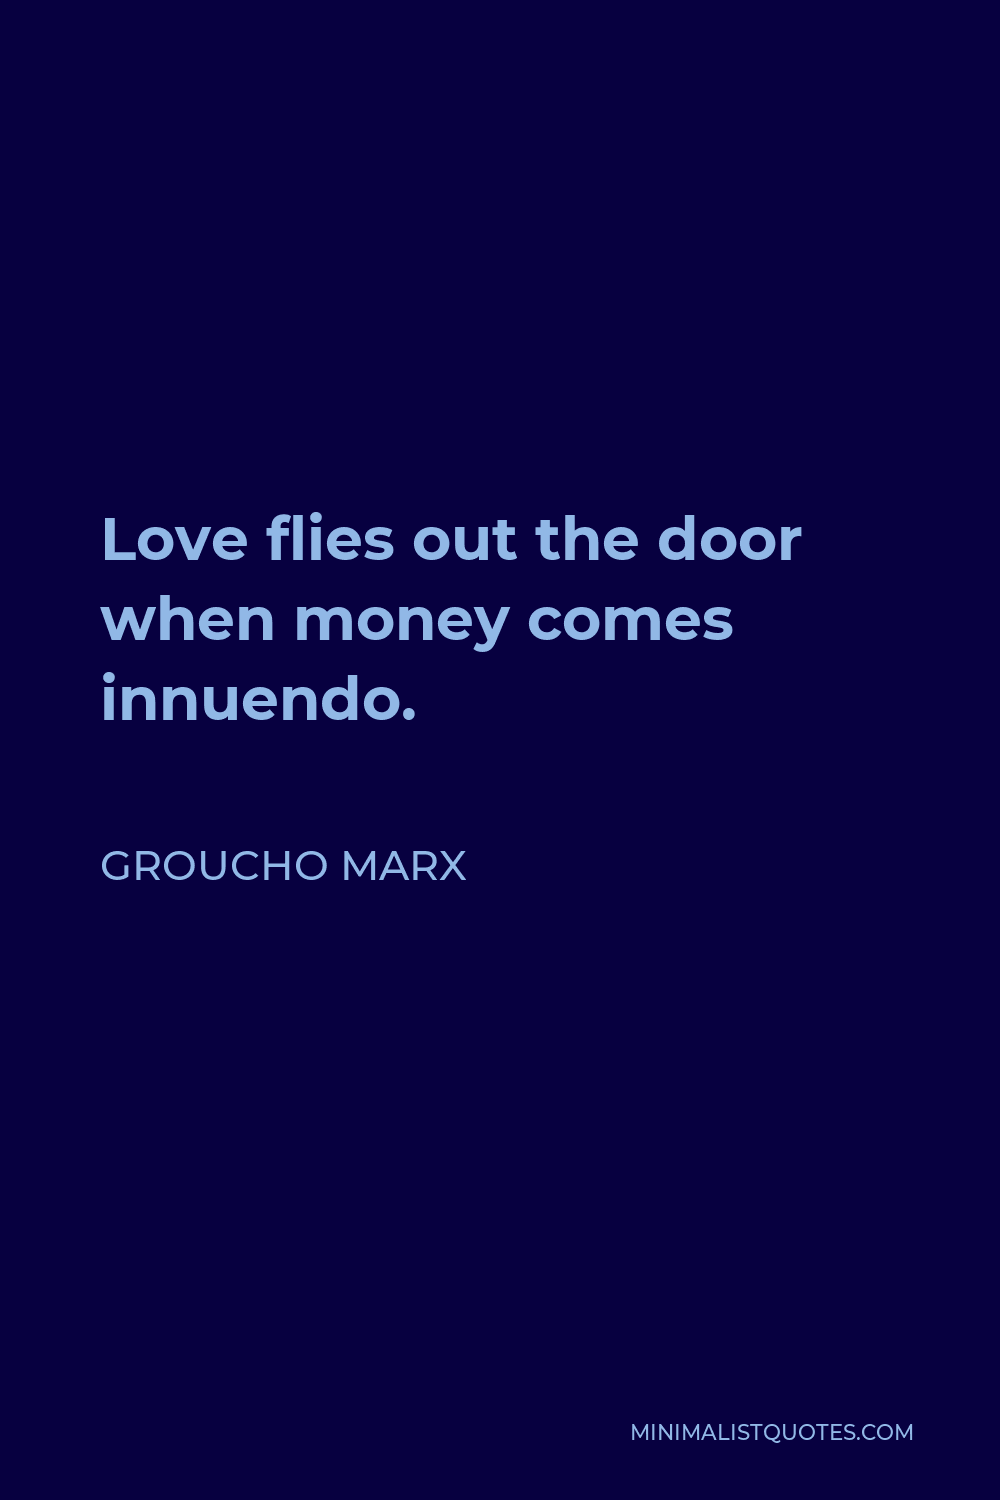 Groucho Marx Quote - Love flies out the door when money comes innuendo.